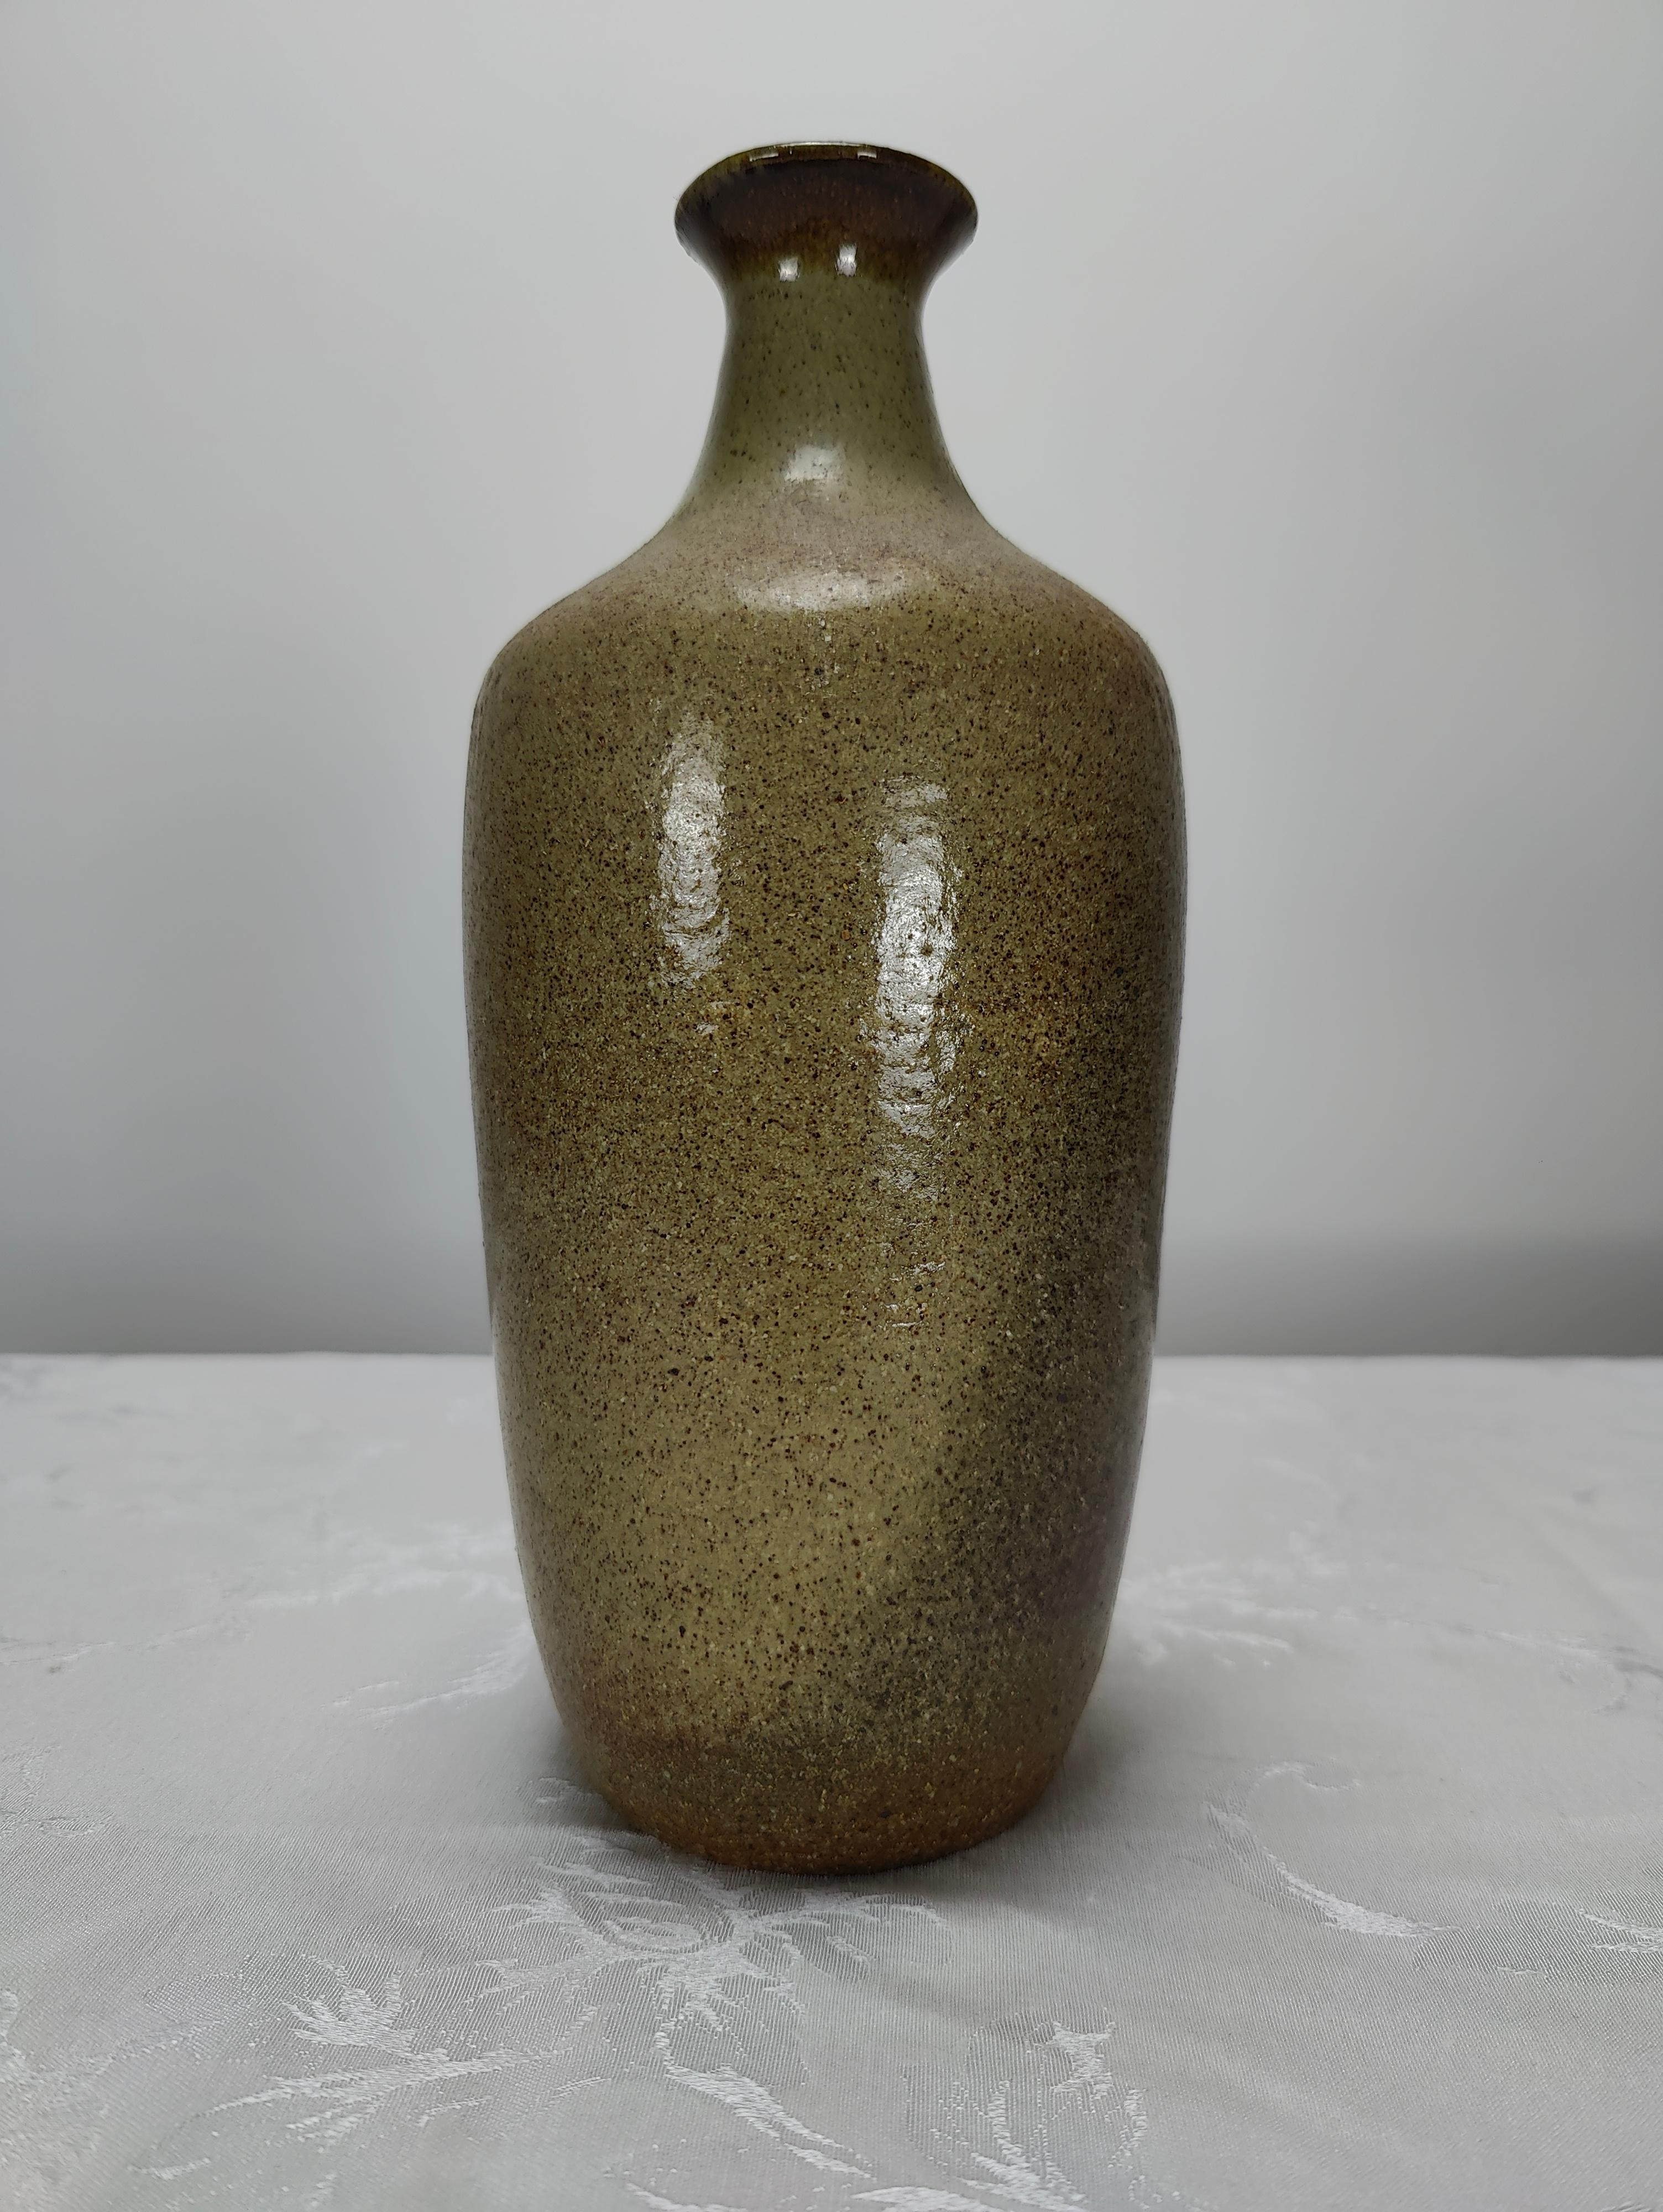 American Vintage Midcentury Ceramic Decorative Vase by Maxine Scholts, circa 1970s For Sale